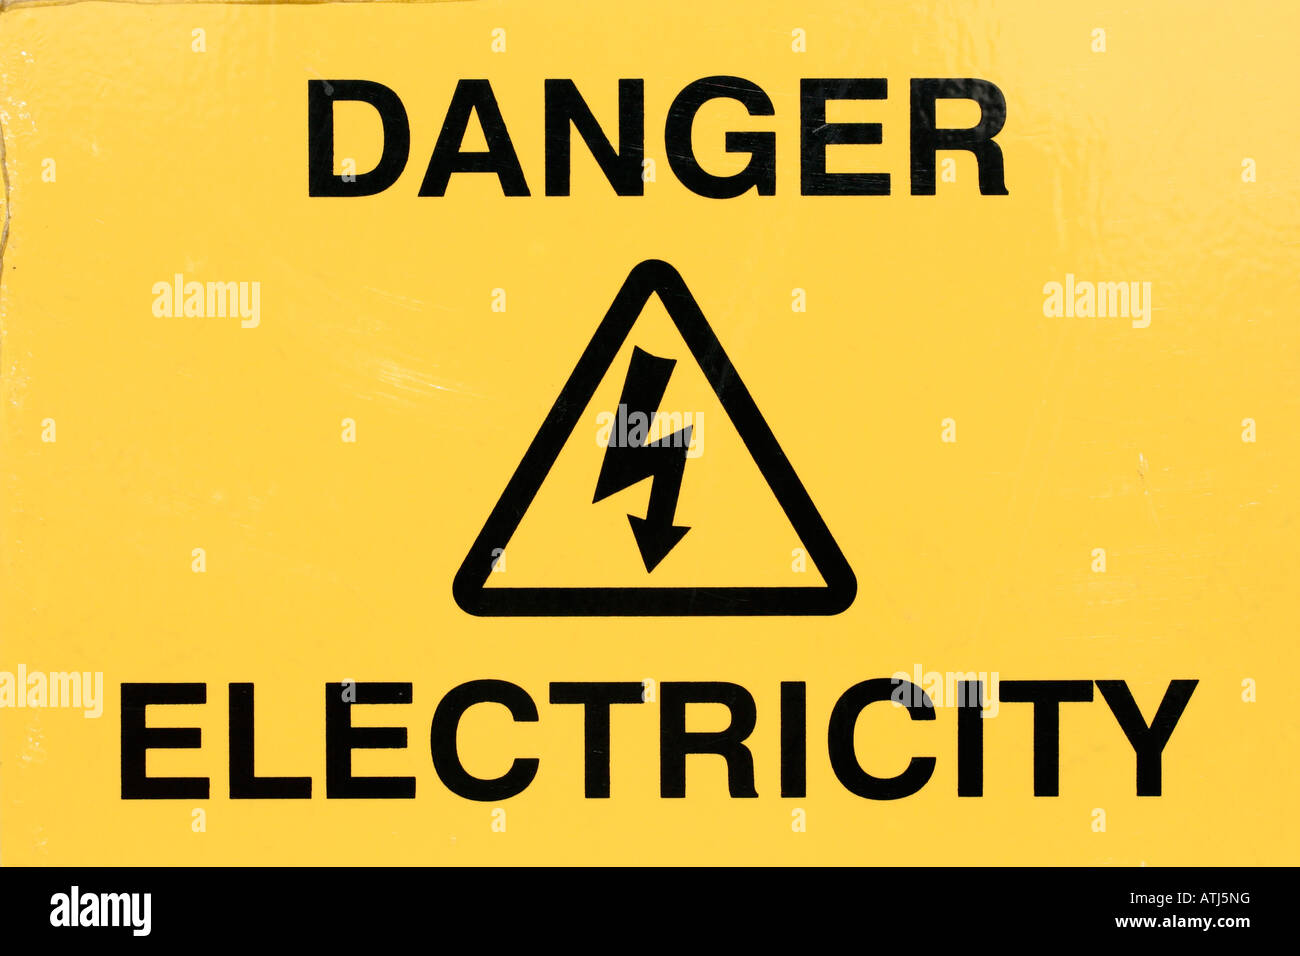 Warning notice, Danger - Electricity Stock Photo